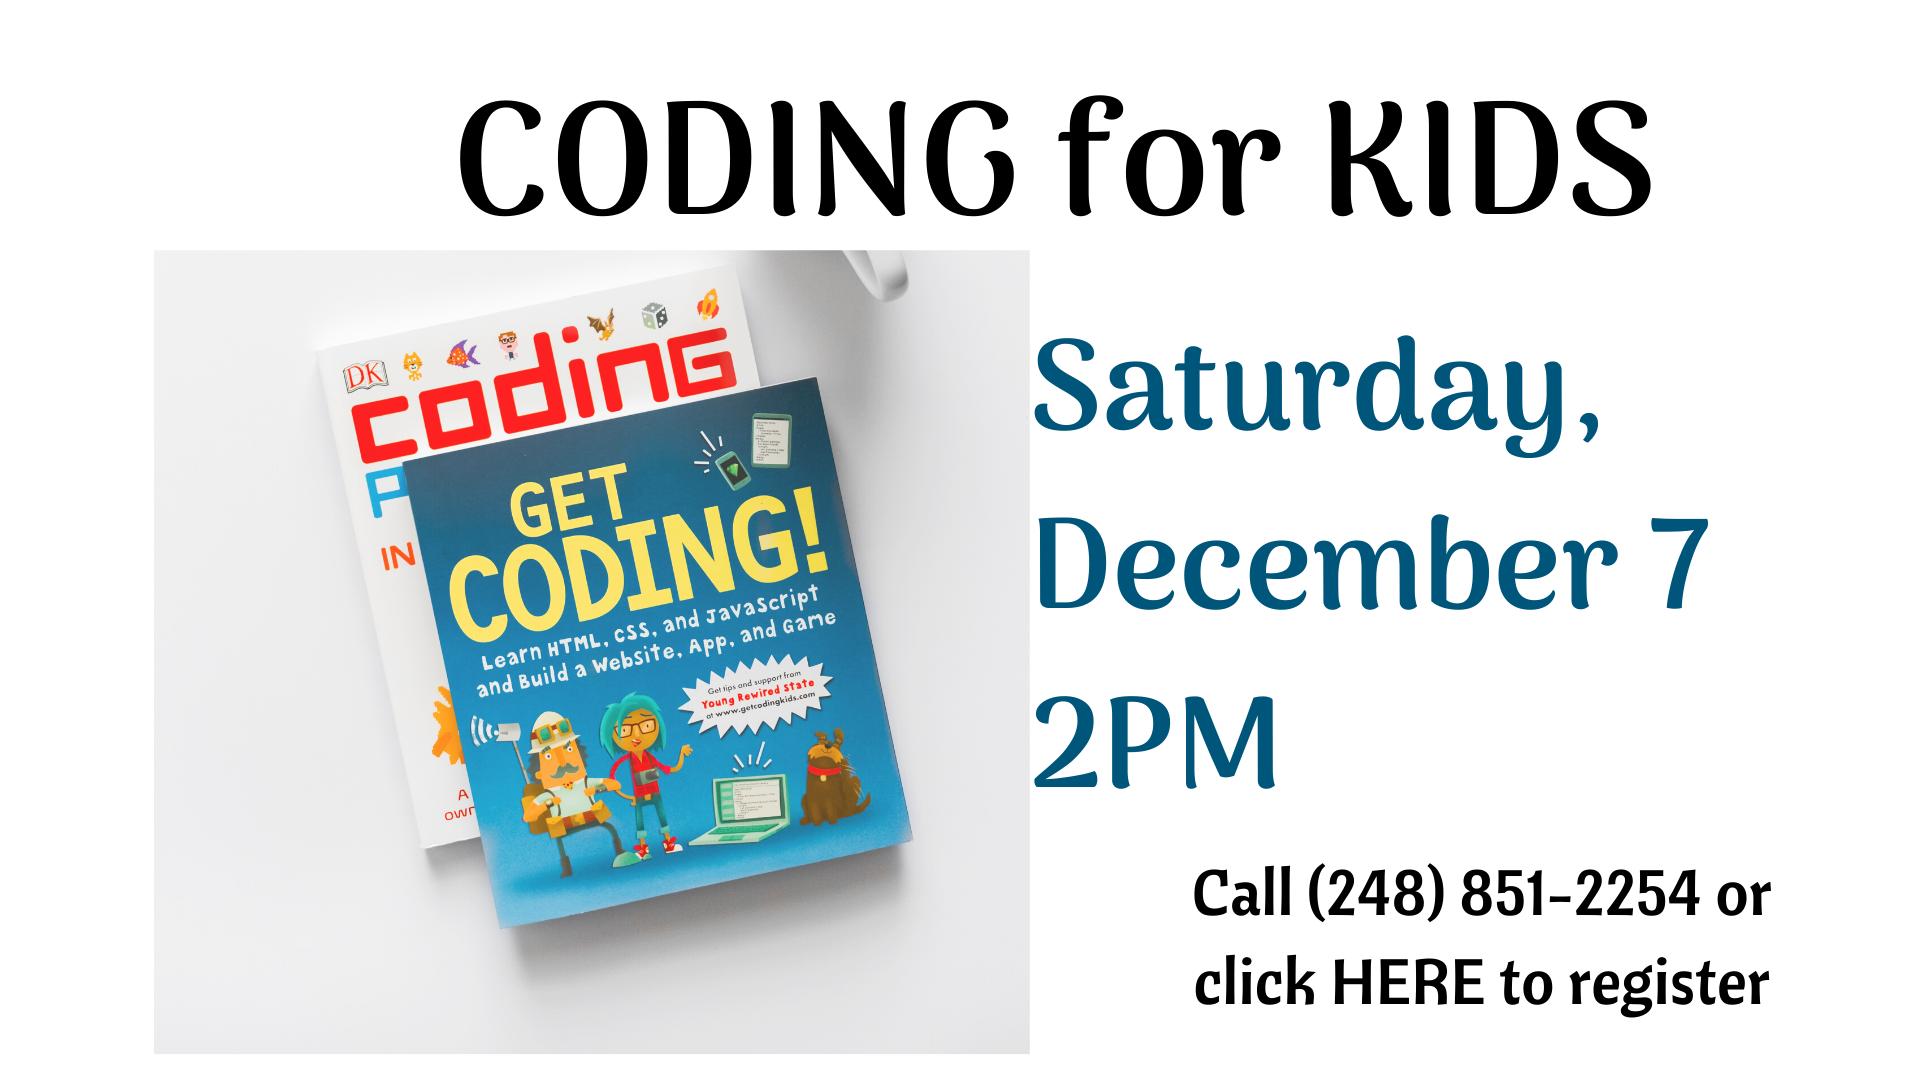 CAROUSEL Coding for Kids 12.7.19.png